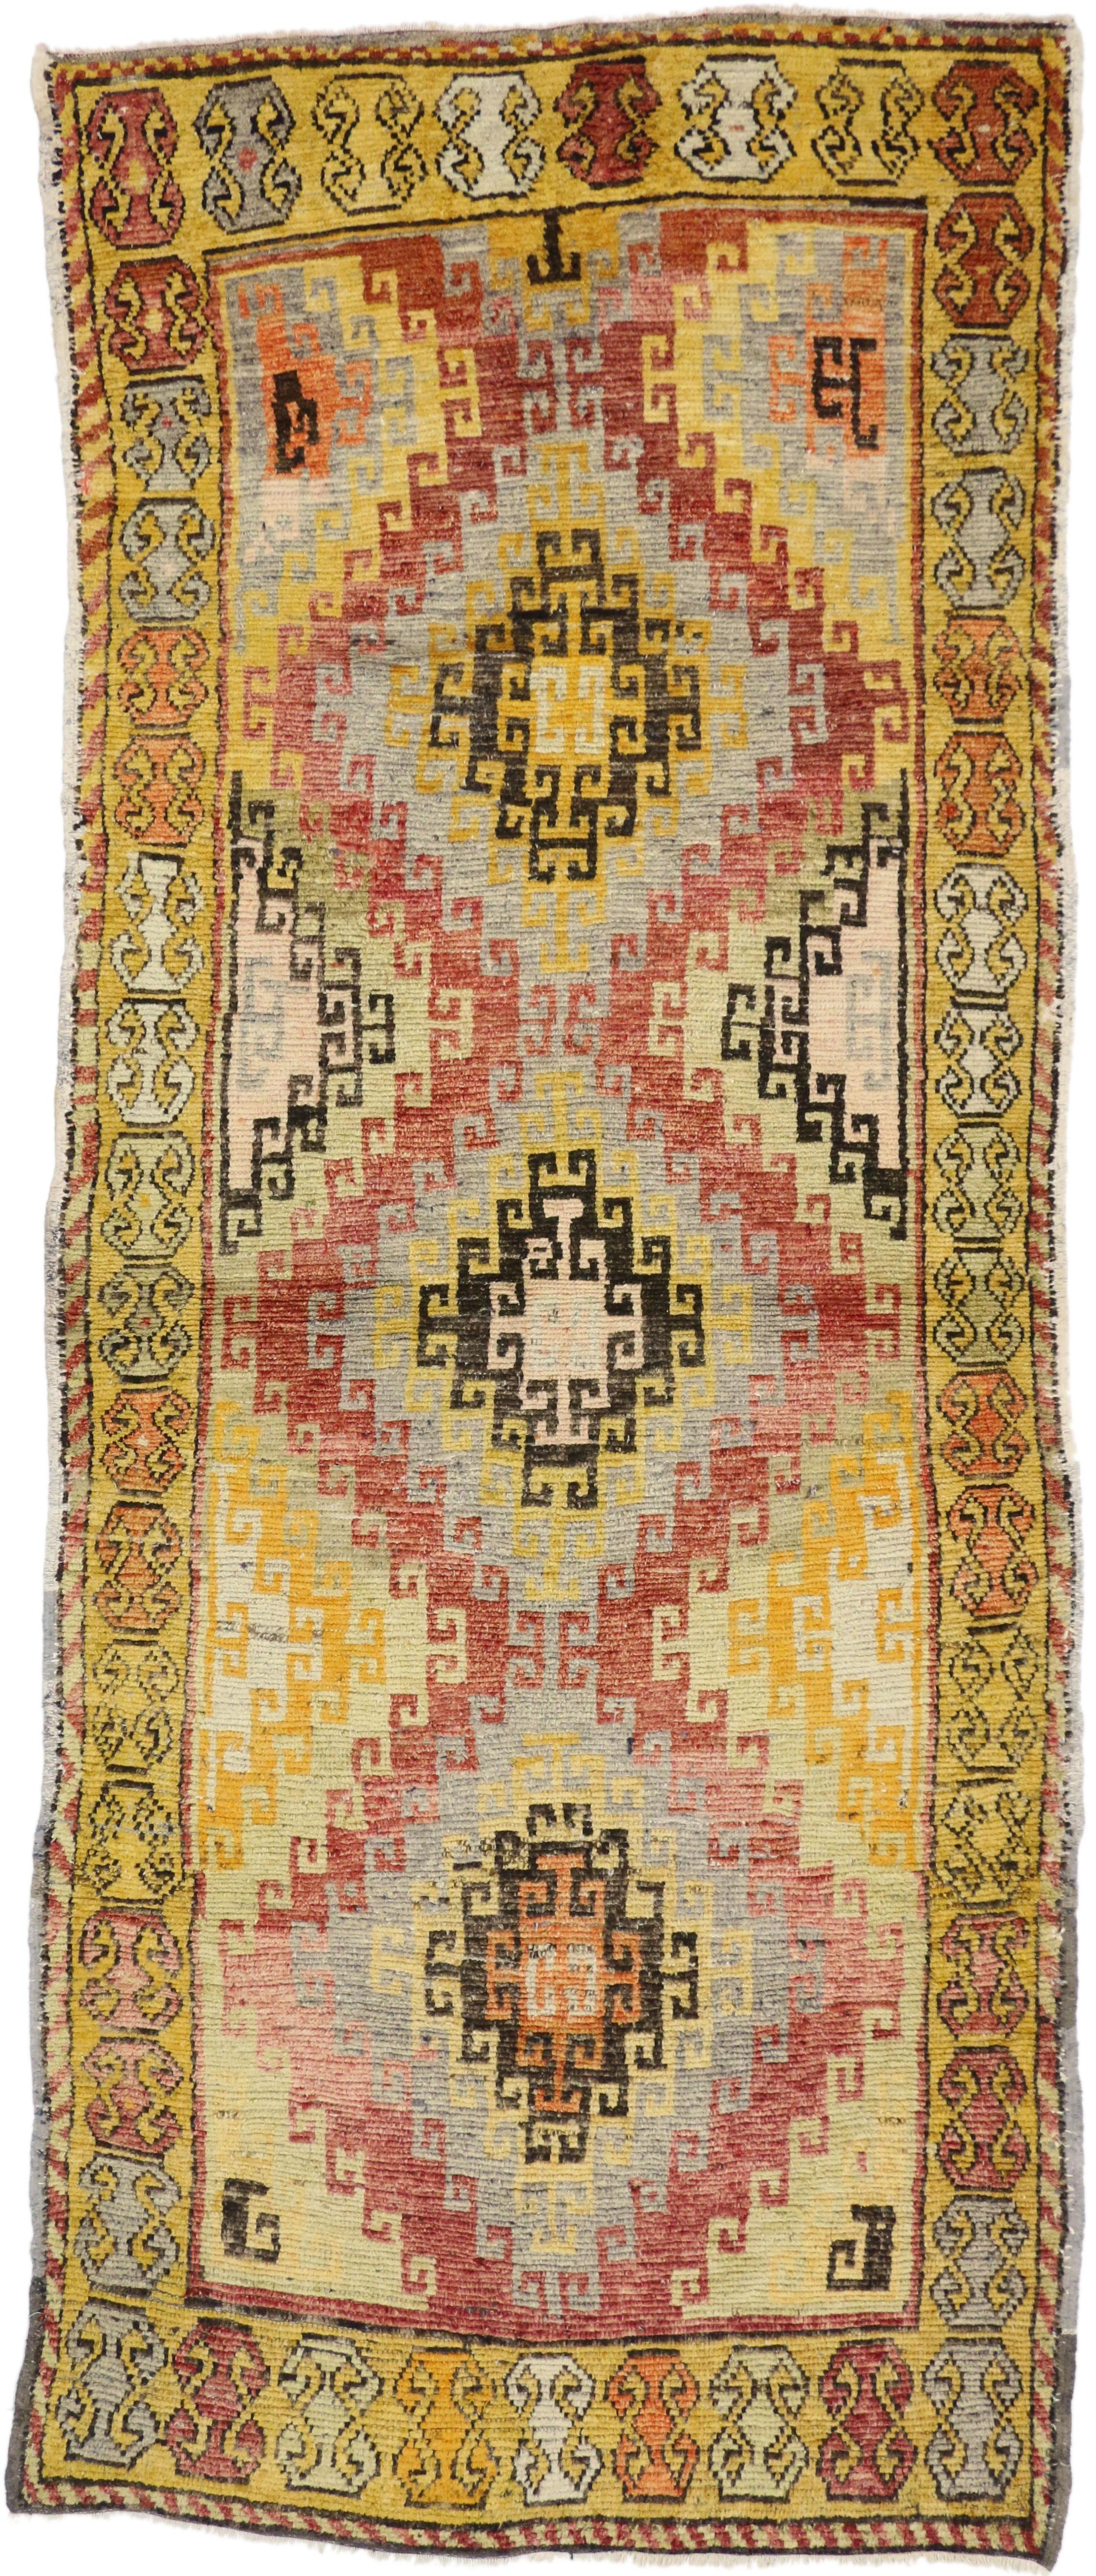 50224 Antique Turkish Oushak Runner with Mid-Century Modern Tribal Style, Hallway Carpet Runner 04'01 x 10'00. With vibrant colors, bold geometric forms, and primitive charm, this hand knotted wool antique Turkish Oushak runner manages to